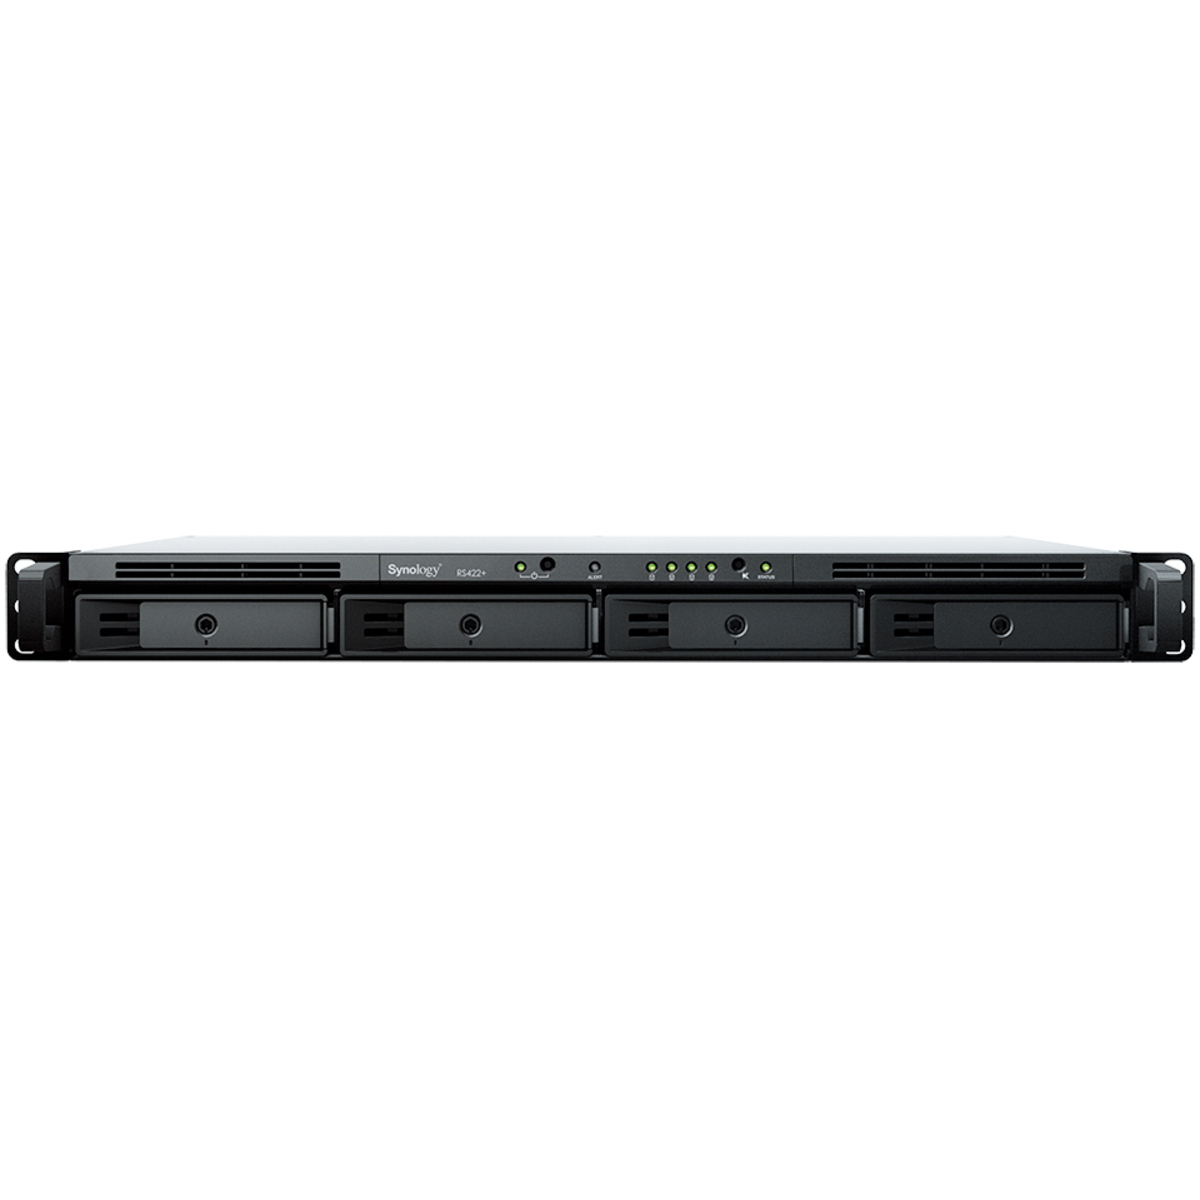 Synology RackStation RS422+ 72tb 4-Bay RackMount Personal / Basic Home / Small Office NAS - Network Attached Storage Device 4x18tb Seagate IronWolf Pro ST18000NT001 3.5 7200rpm SATA 6Gb/s HDD NAS Class Drives Installed - Burn-In Tested RackStation RS422+